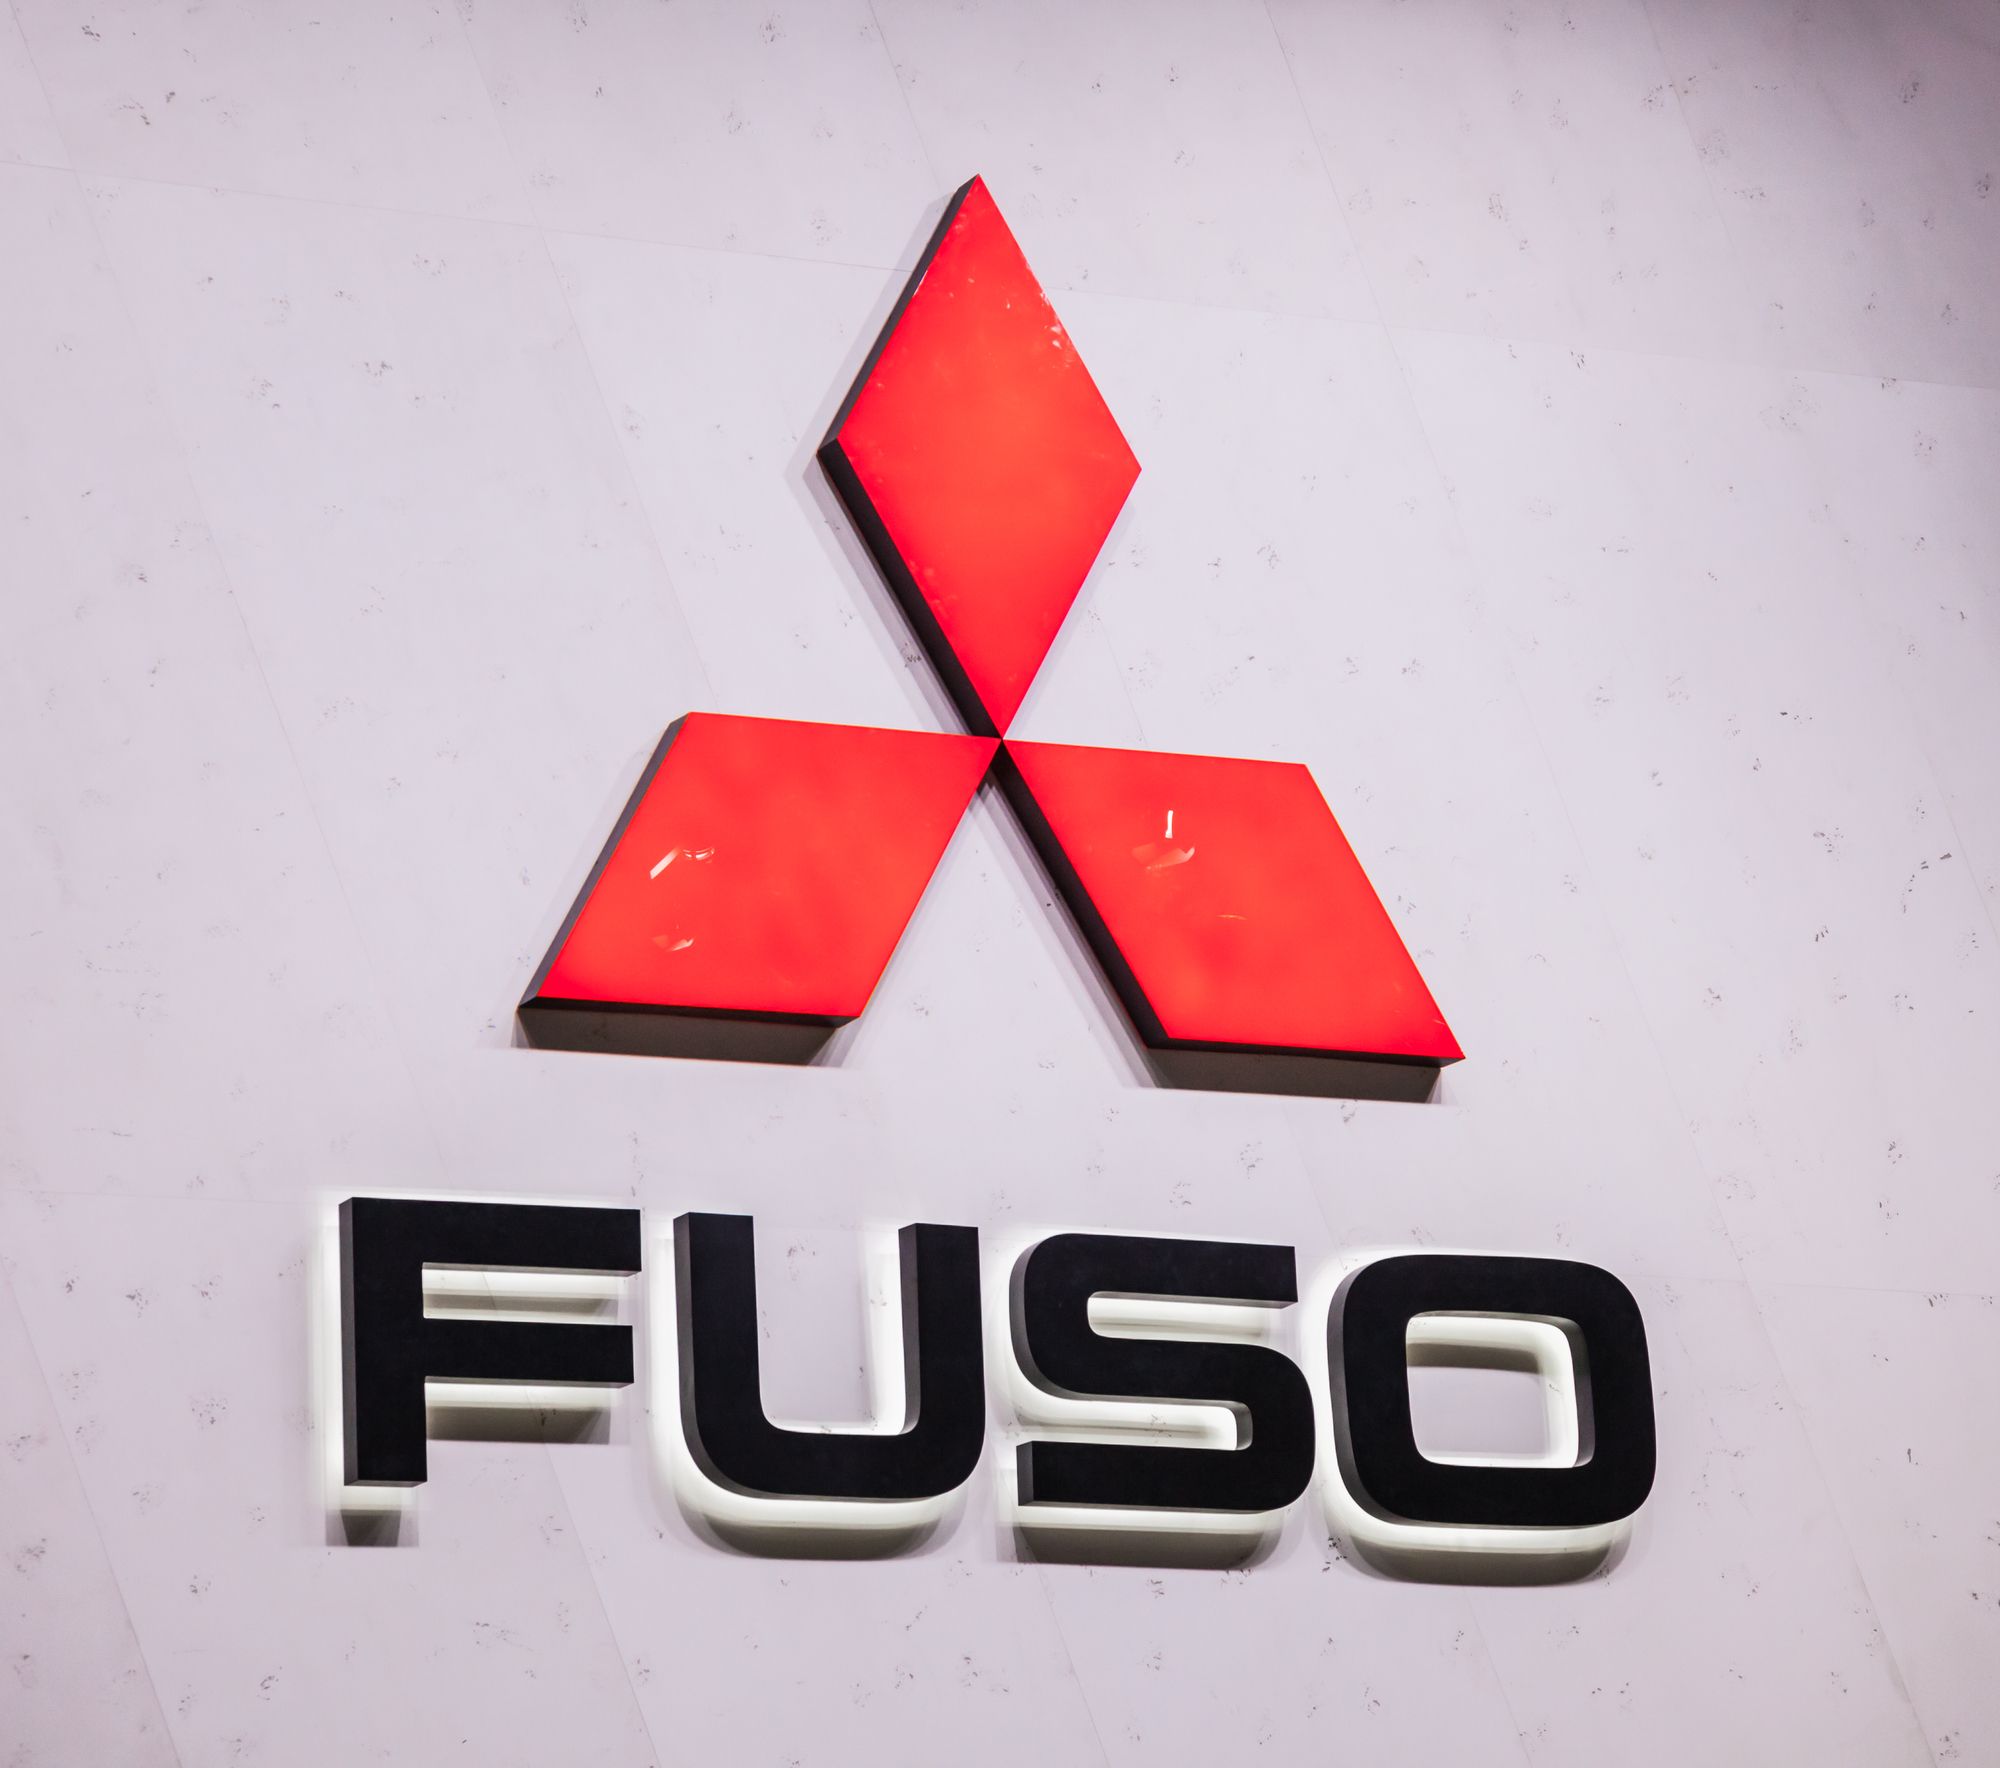 Mitsubishi Fuso Logo at the 65th IAA Commercial Vehicles 2014 in Hannover, Germany